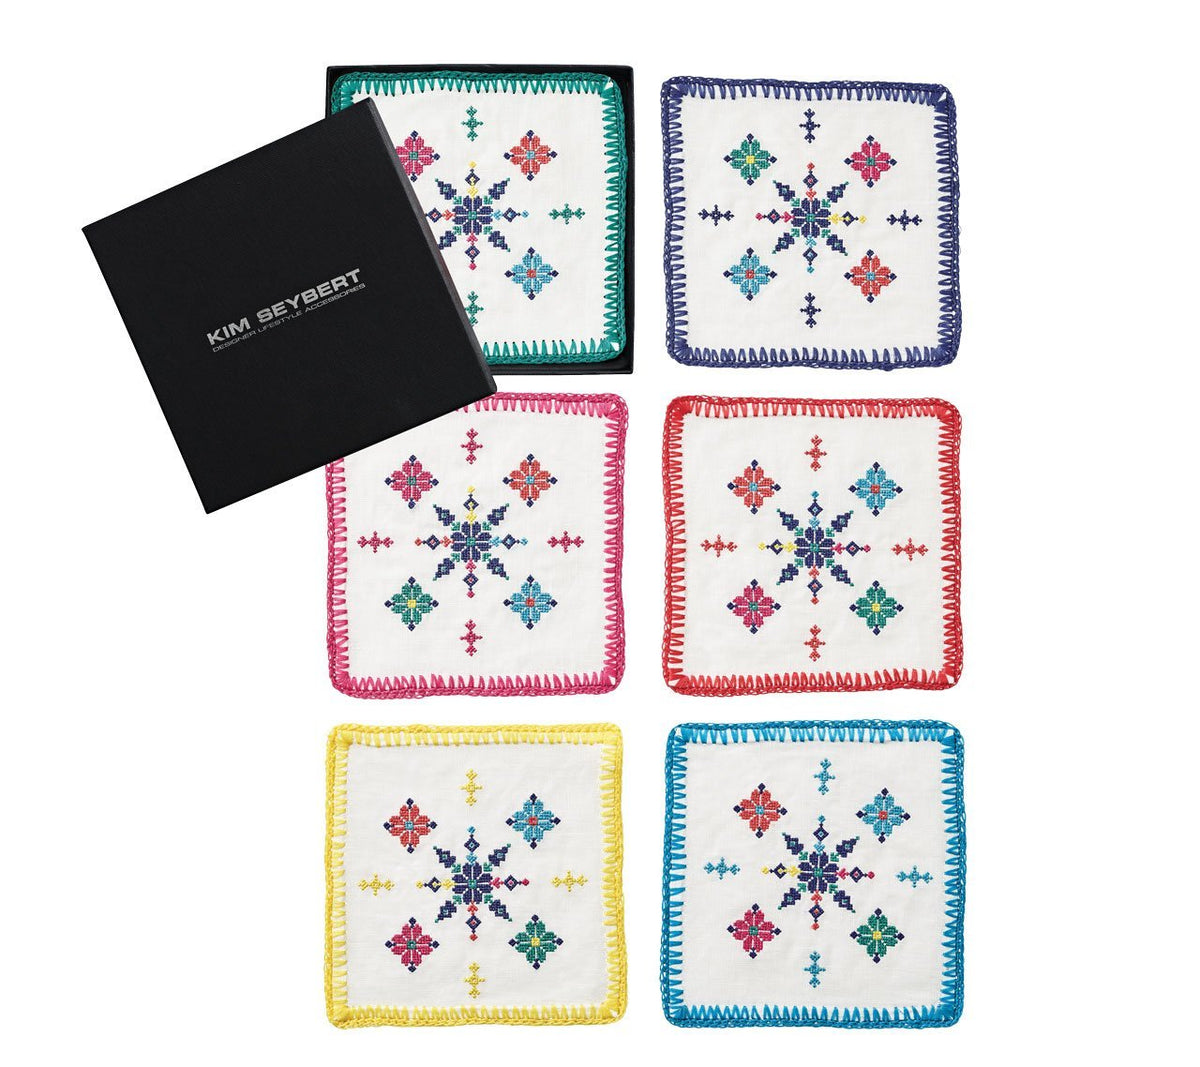 Kim Seybert Luxury Fez Cocktail Napkins, multi-color, set of 6 with a gift box